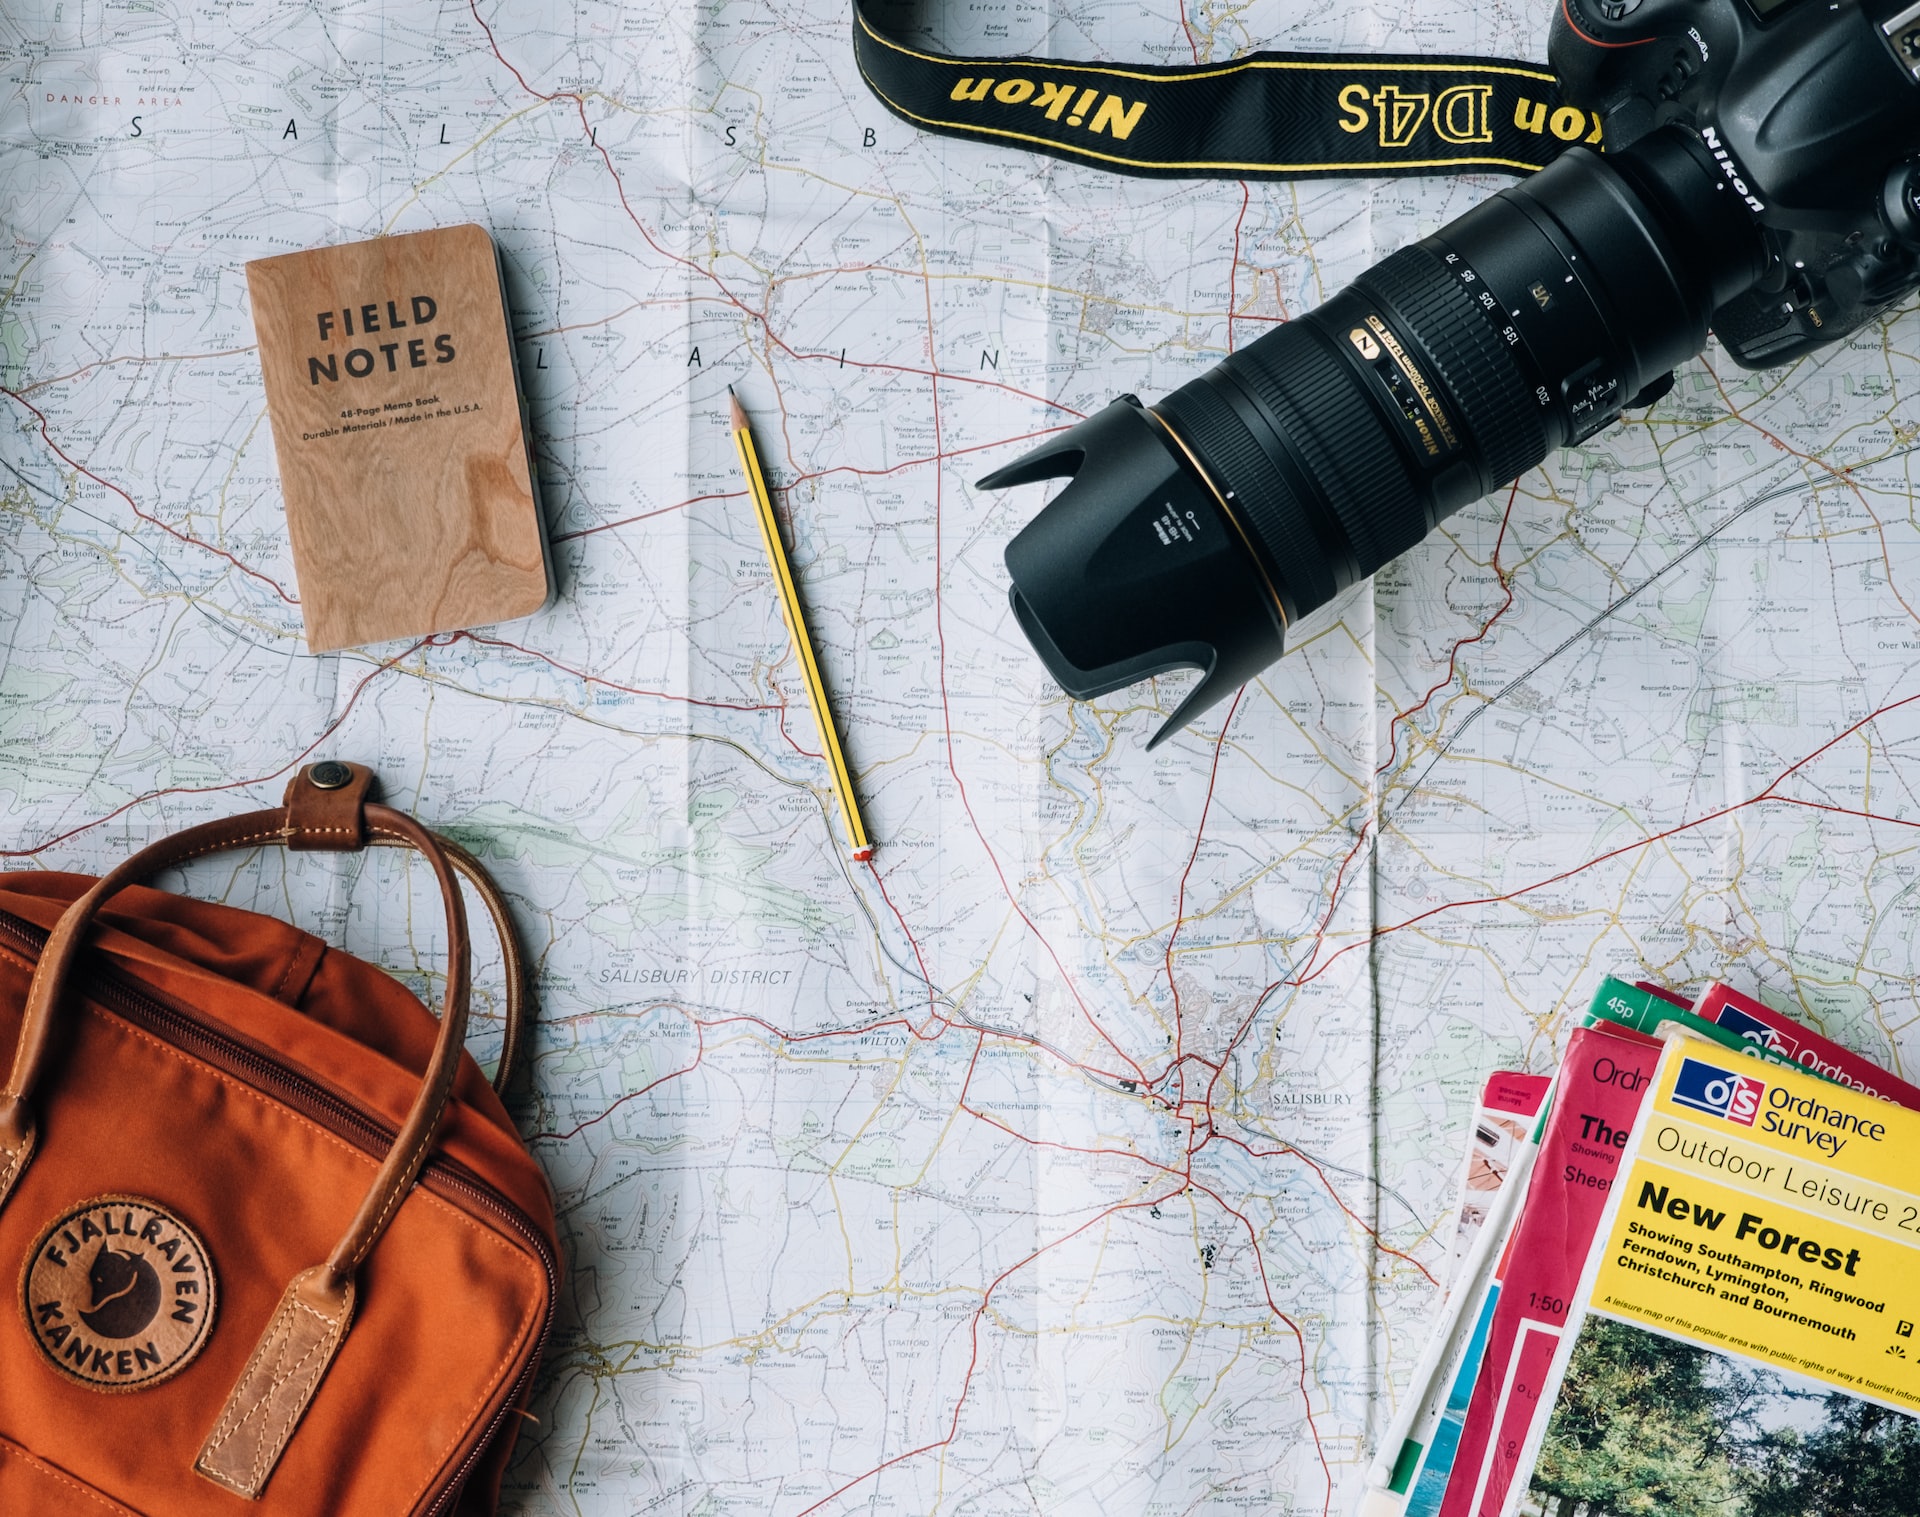 Travel maps and camera